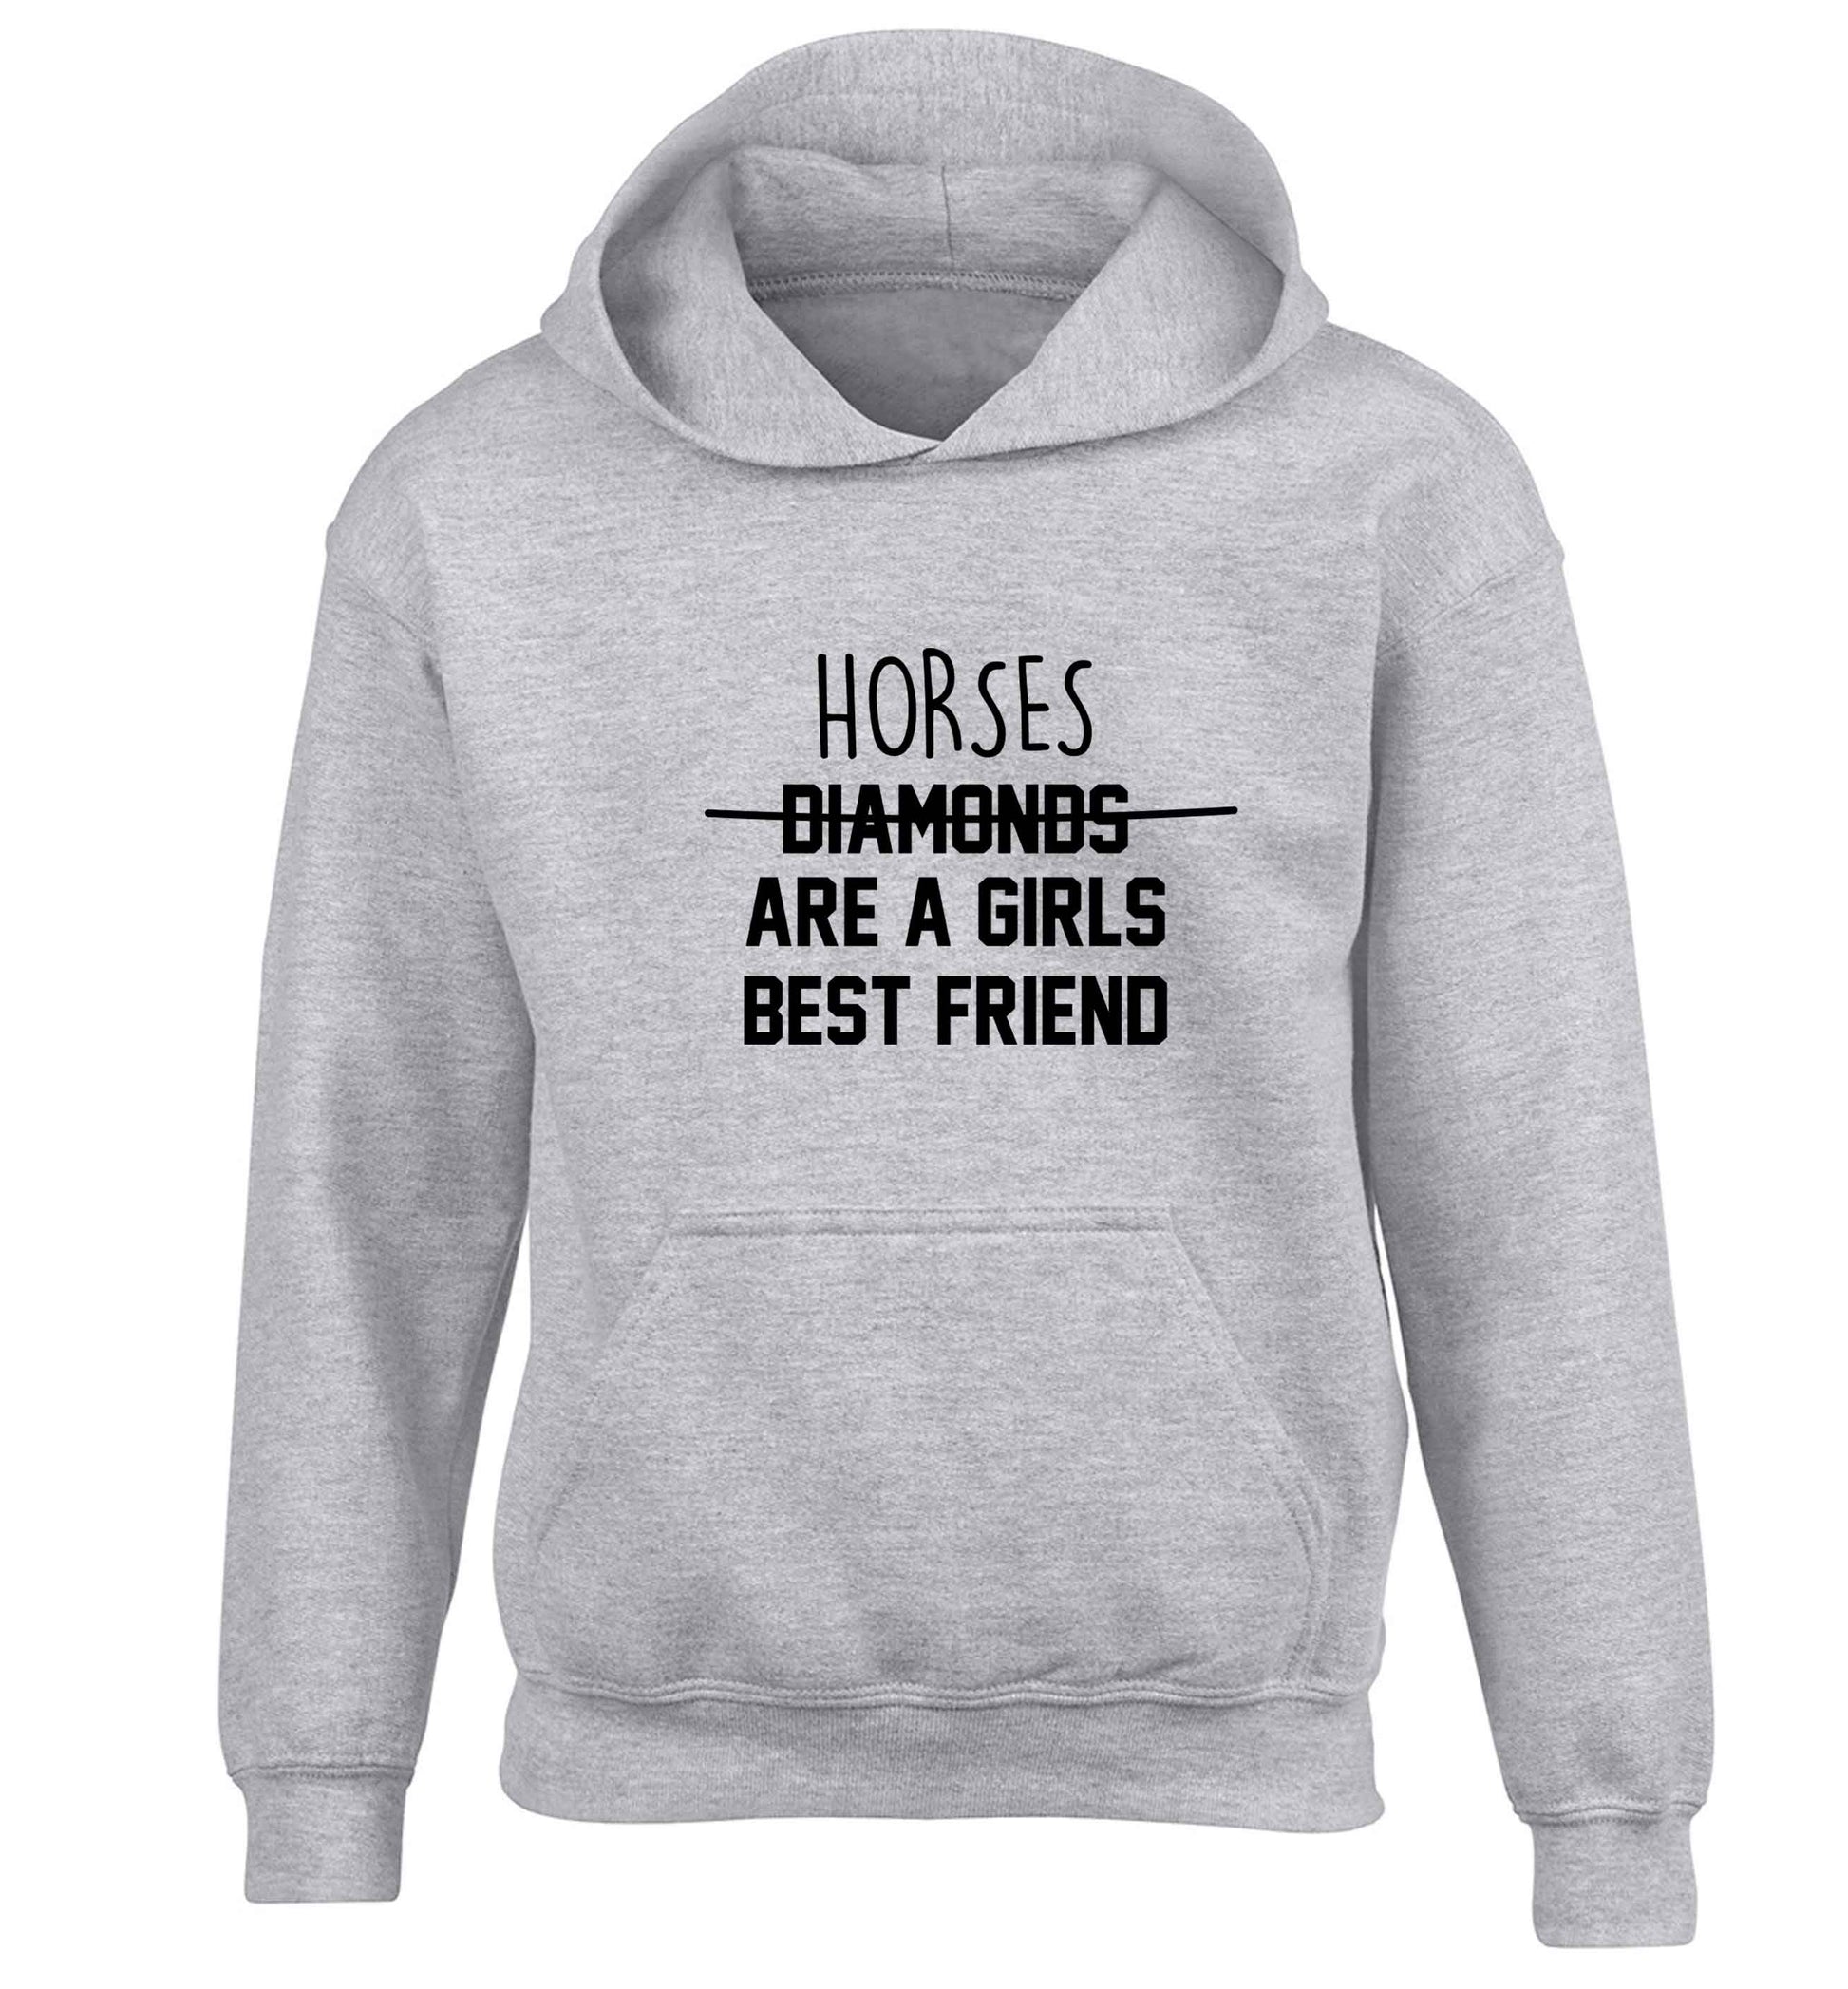 Horses are a girls best friend children's grey hoodie 12-13 Years